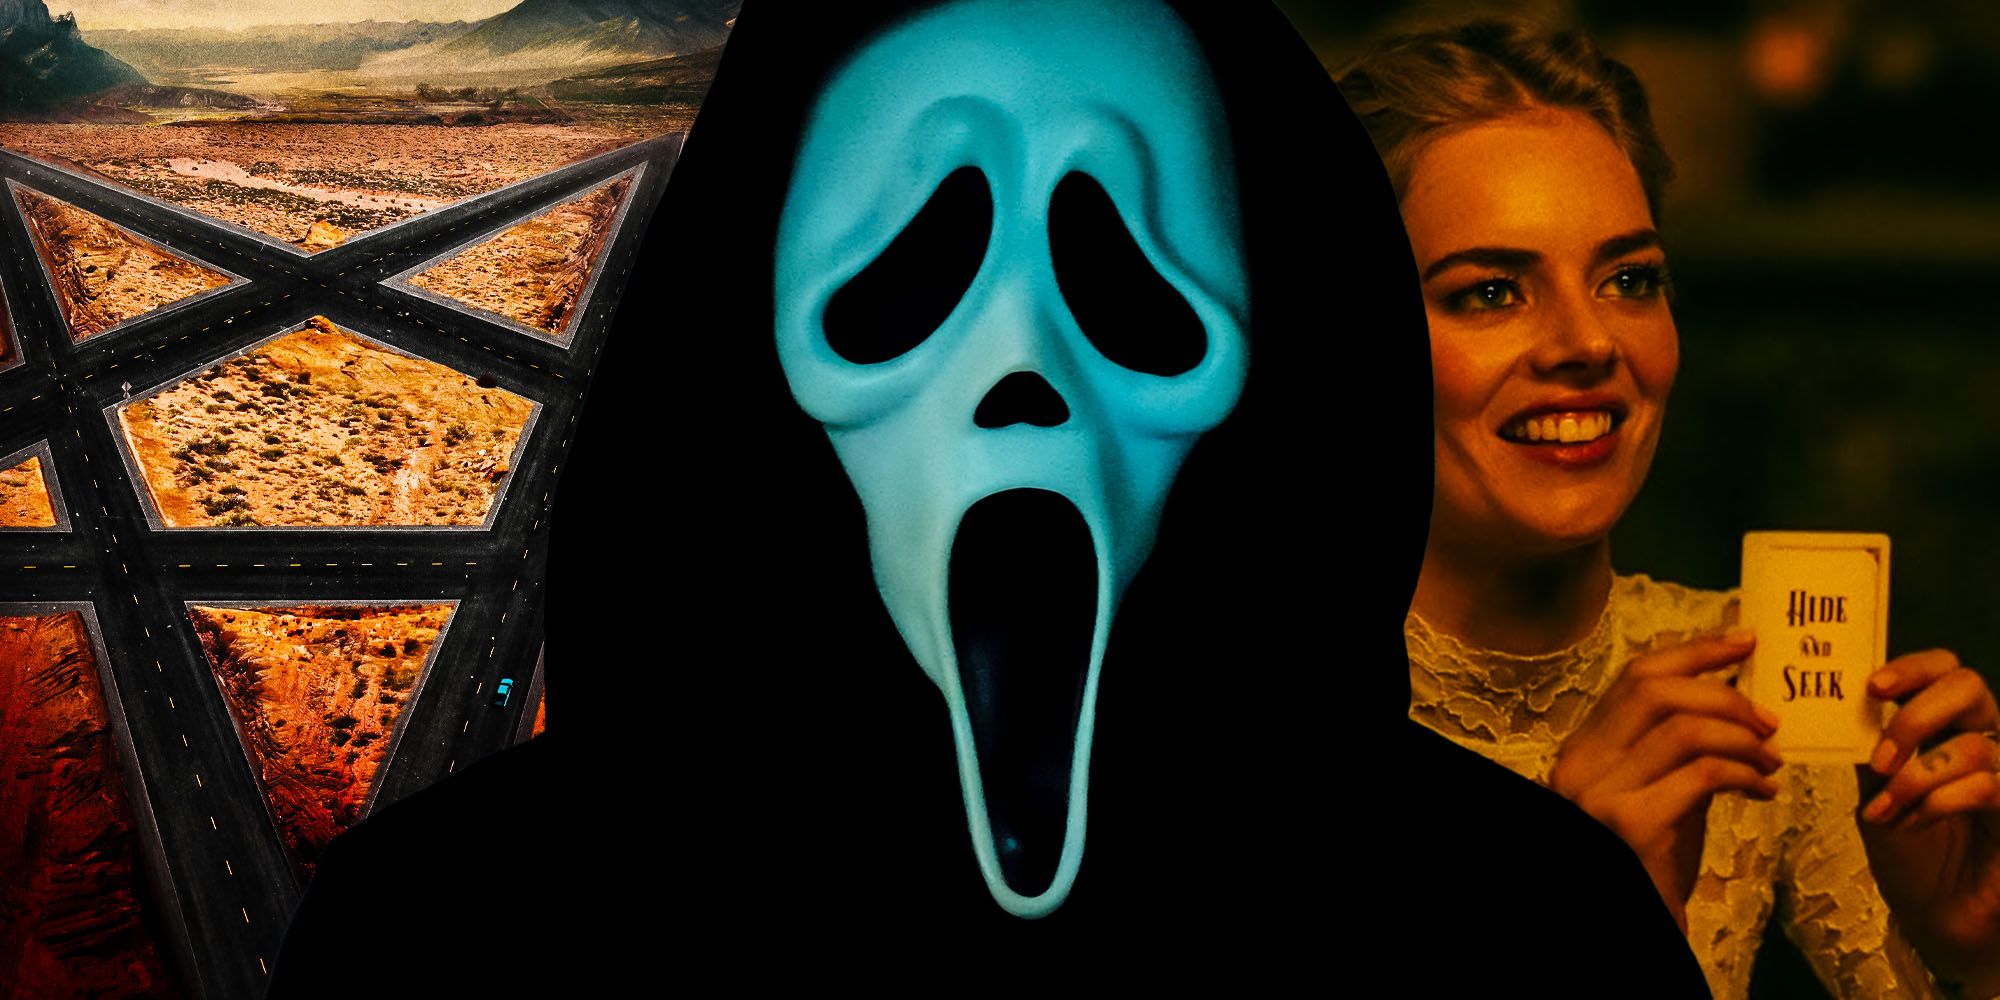 Radio Silence movie ranked scream 2022 southbound ready or not